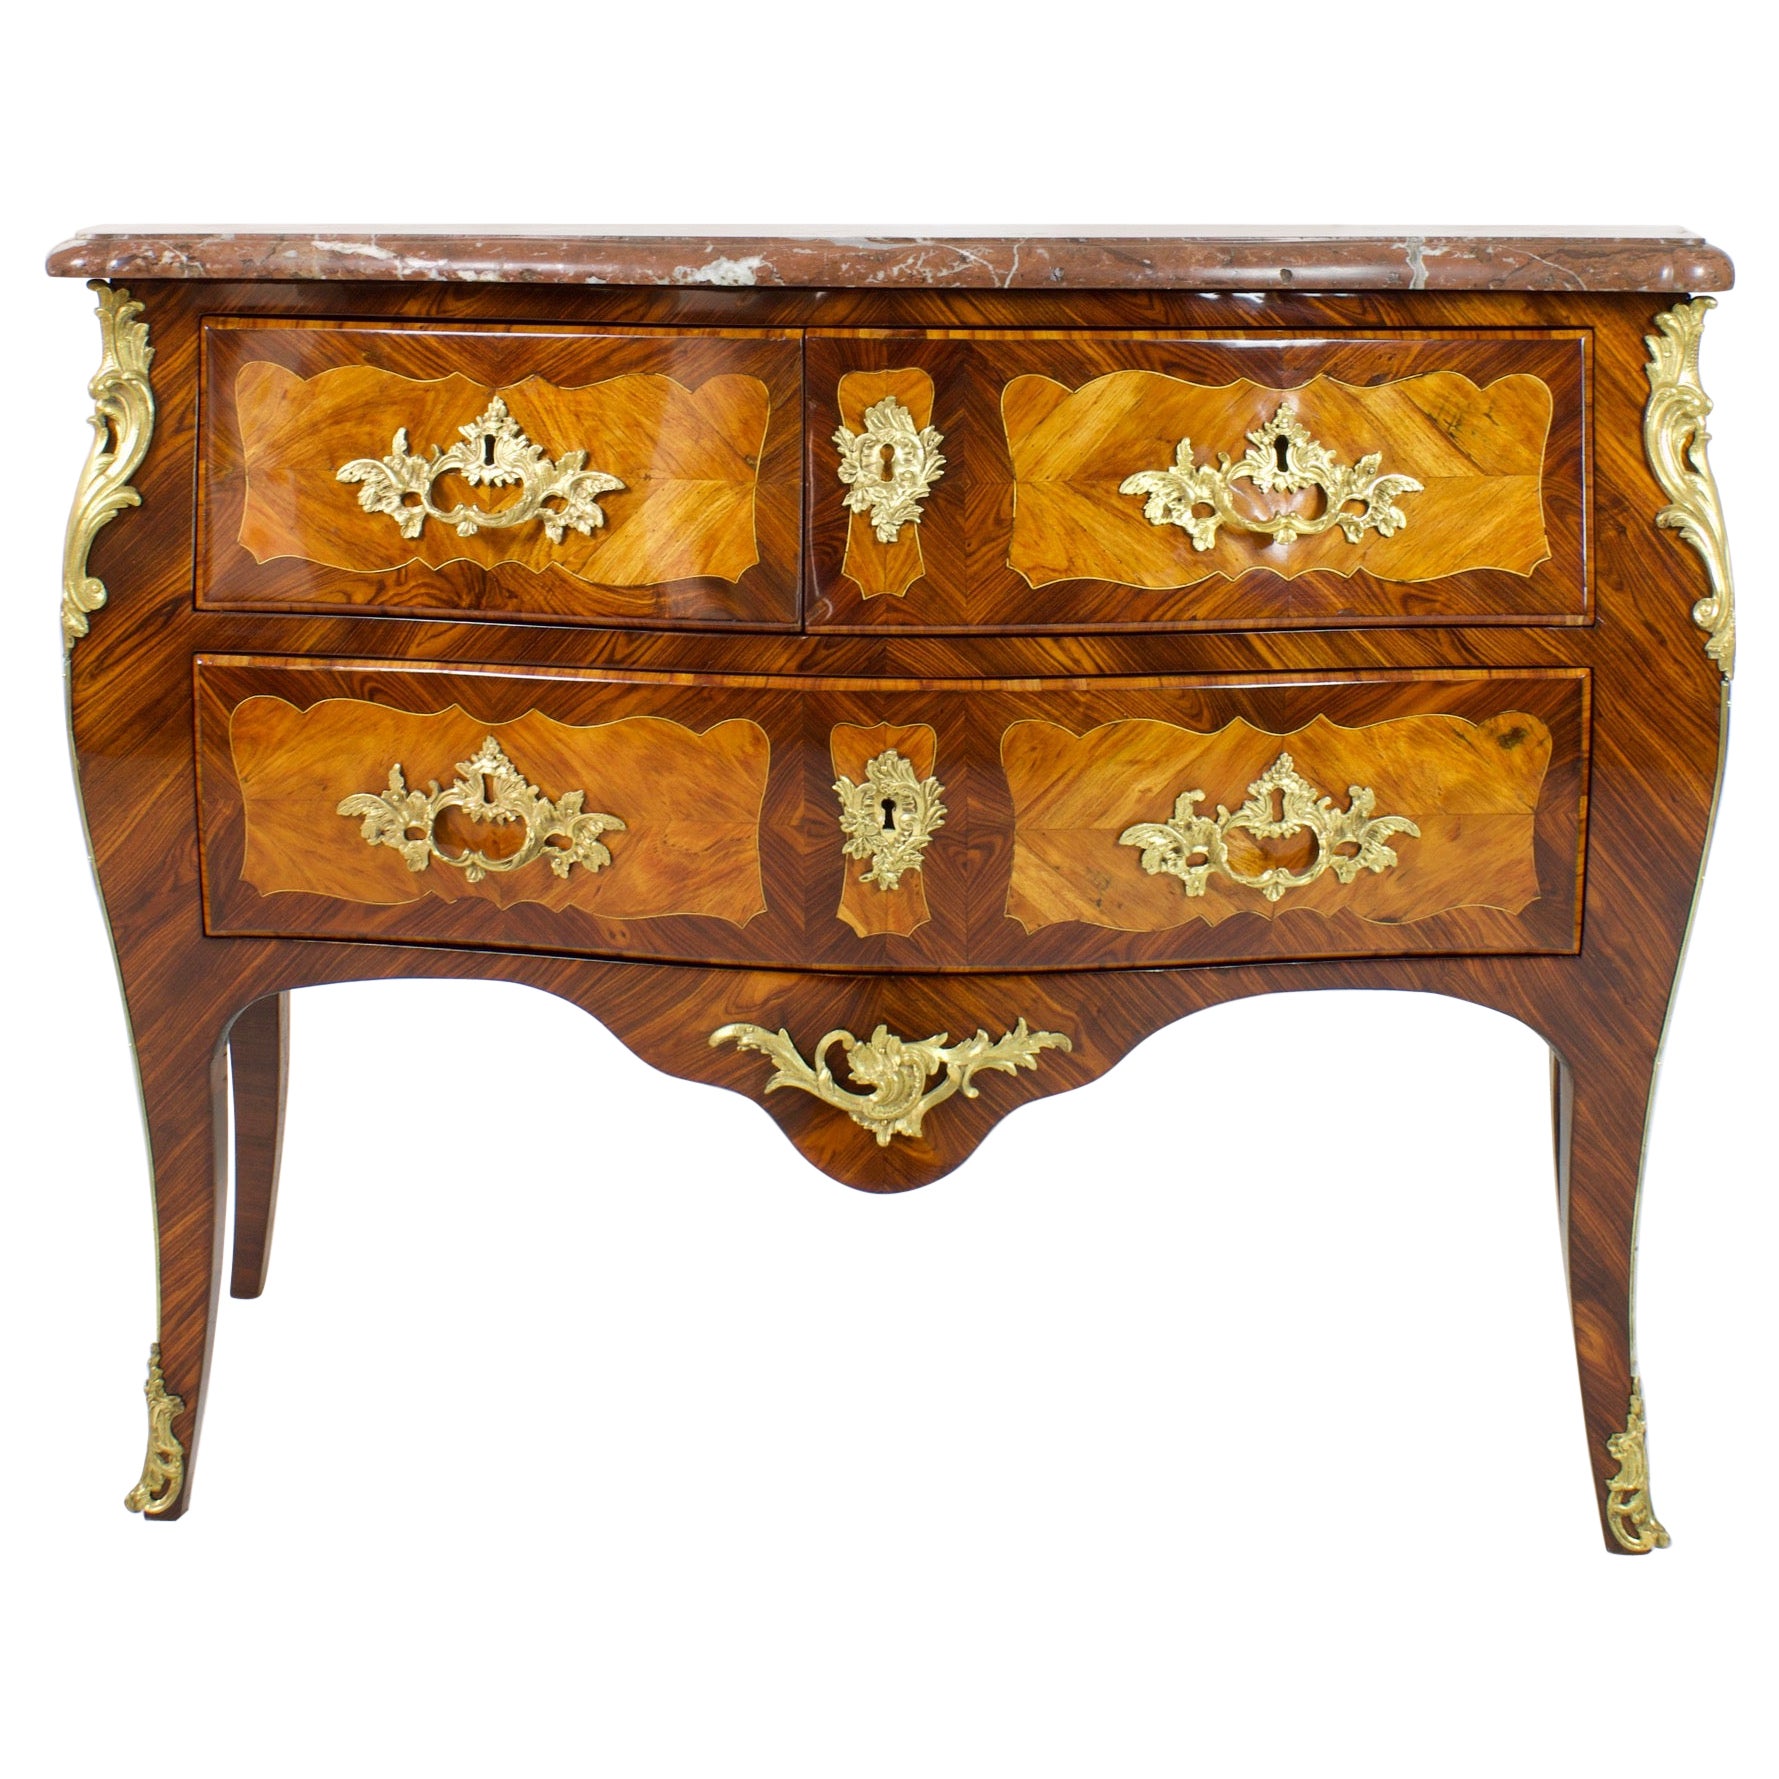 18th Century Louis XV Marquetry Commode or Sauteuse, Stamped "P.ROUSSEL"